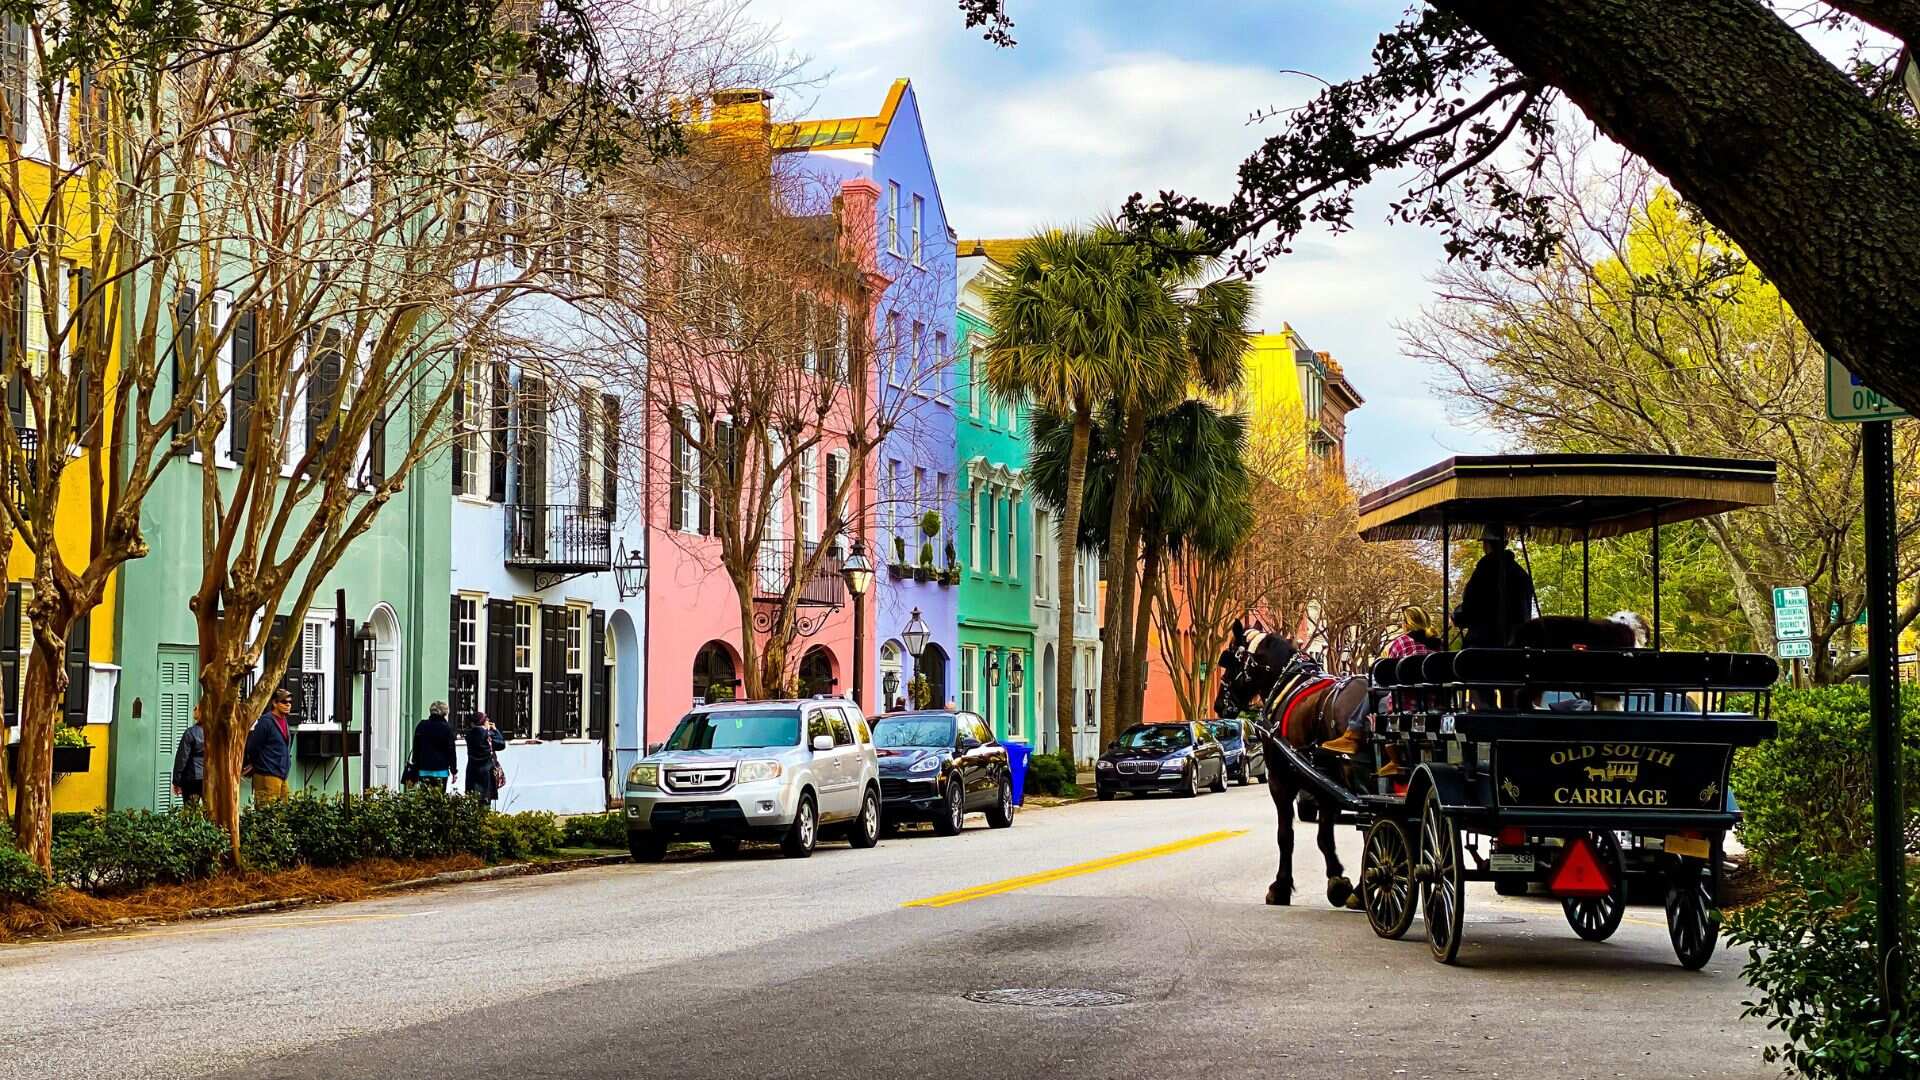 Colorful buildings and a horse carriage in Charleston, South Carolina. - History By Mail